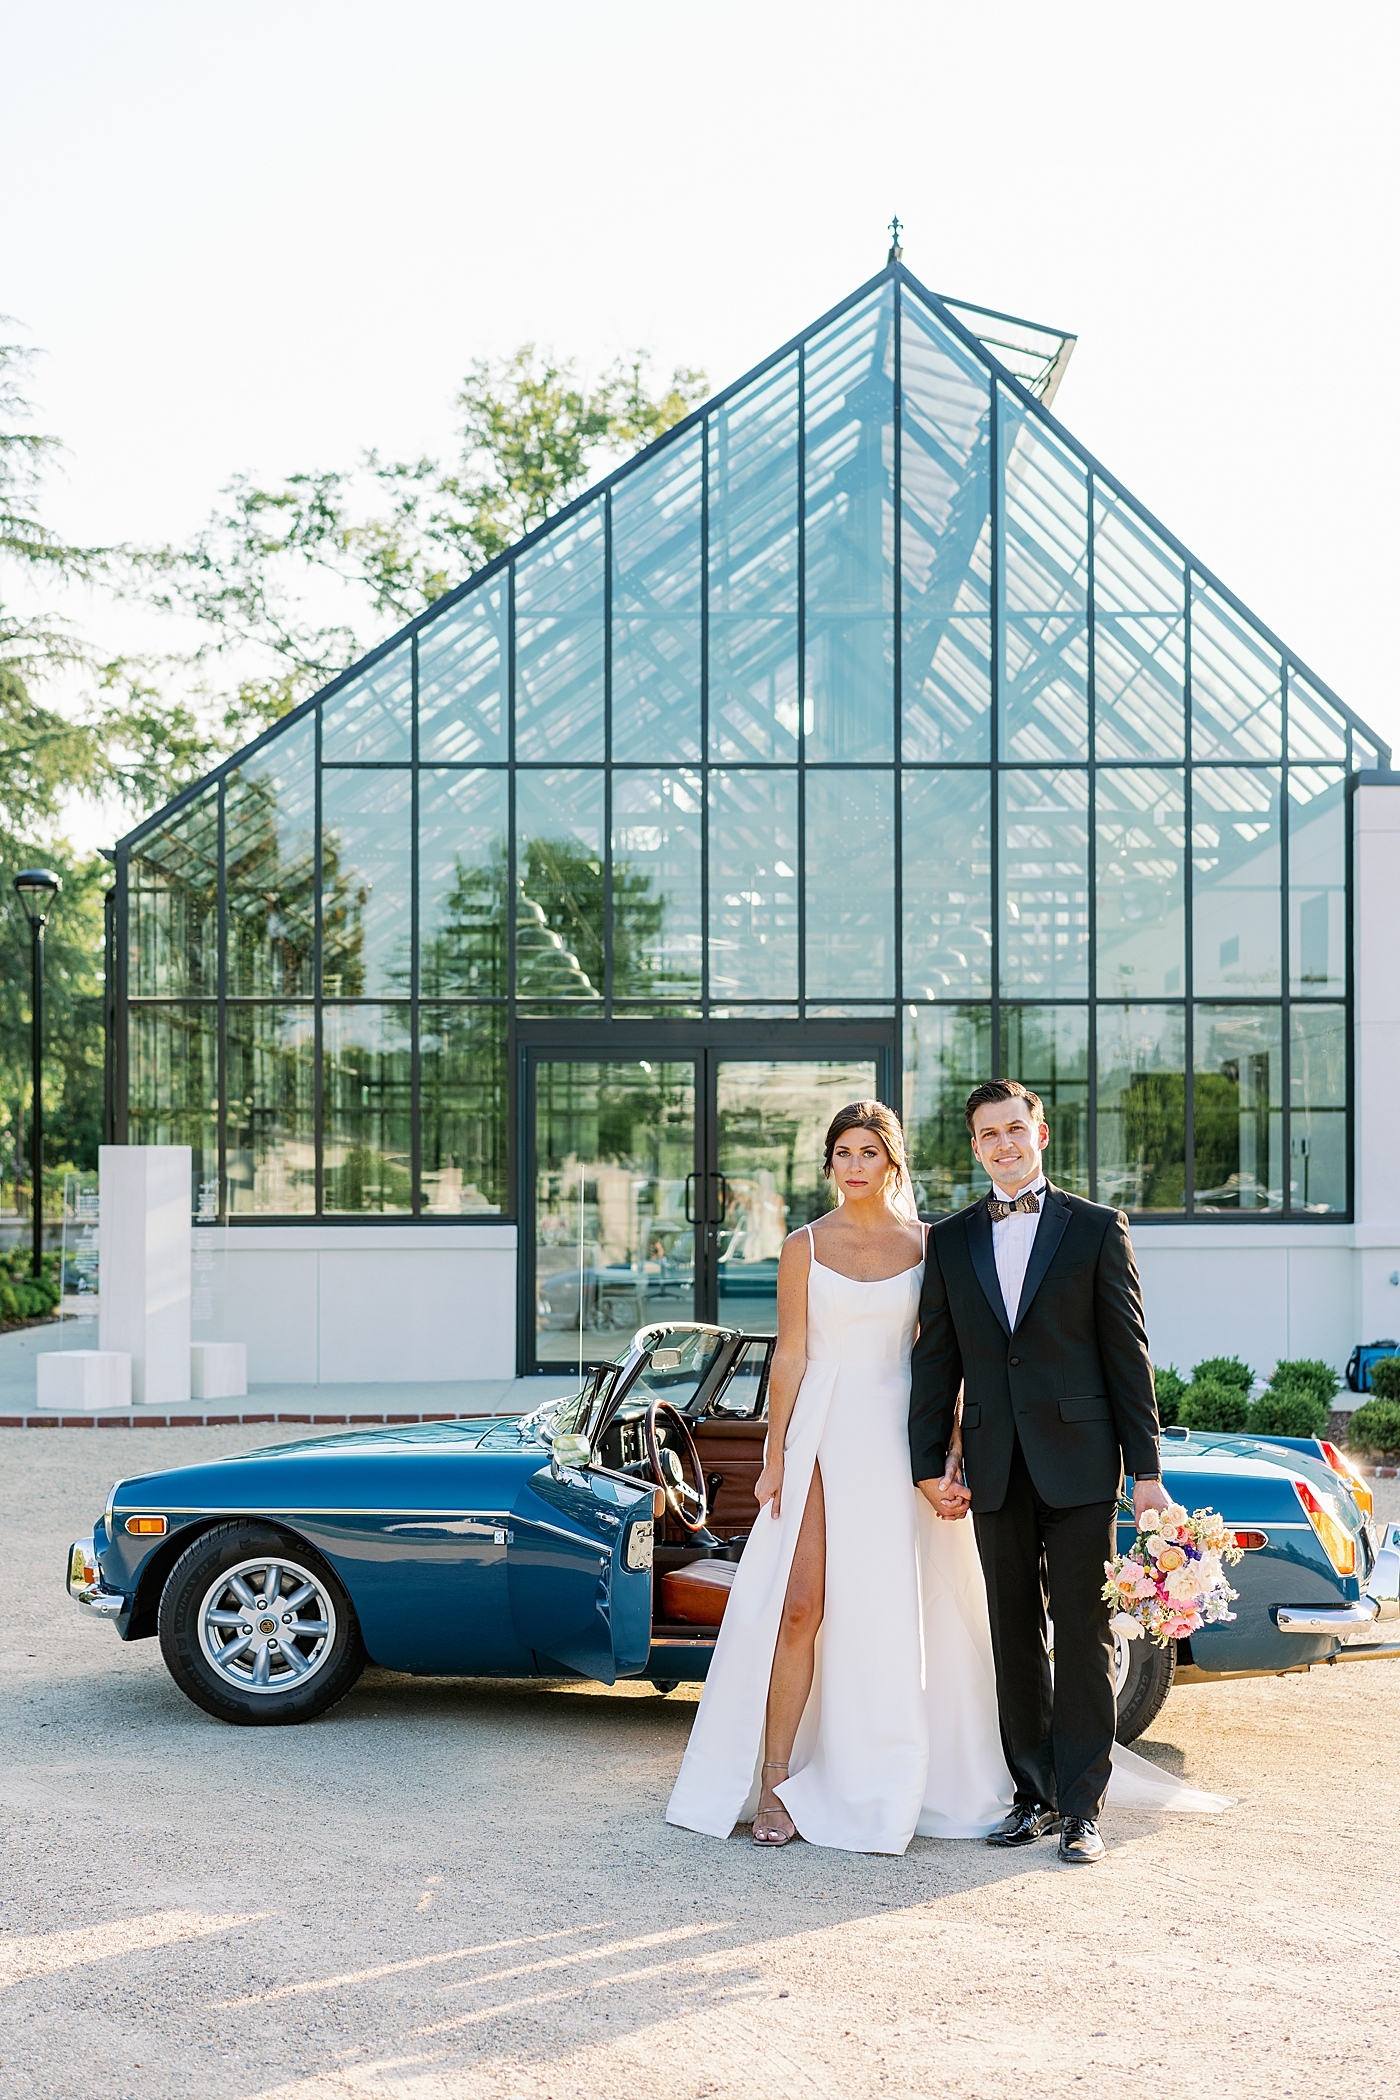 Couple in front of greenhouse | Photo by Annie Laura Photo